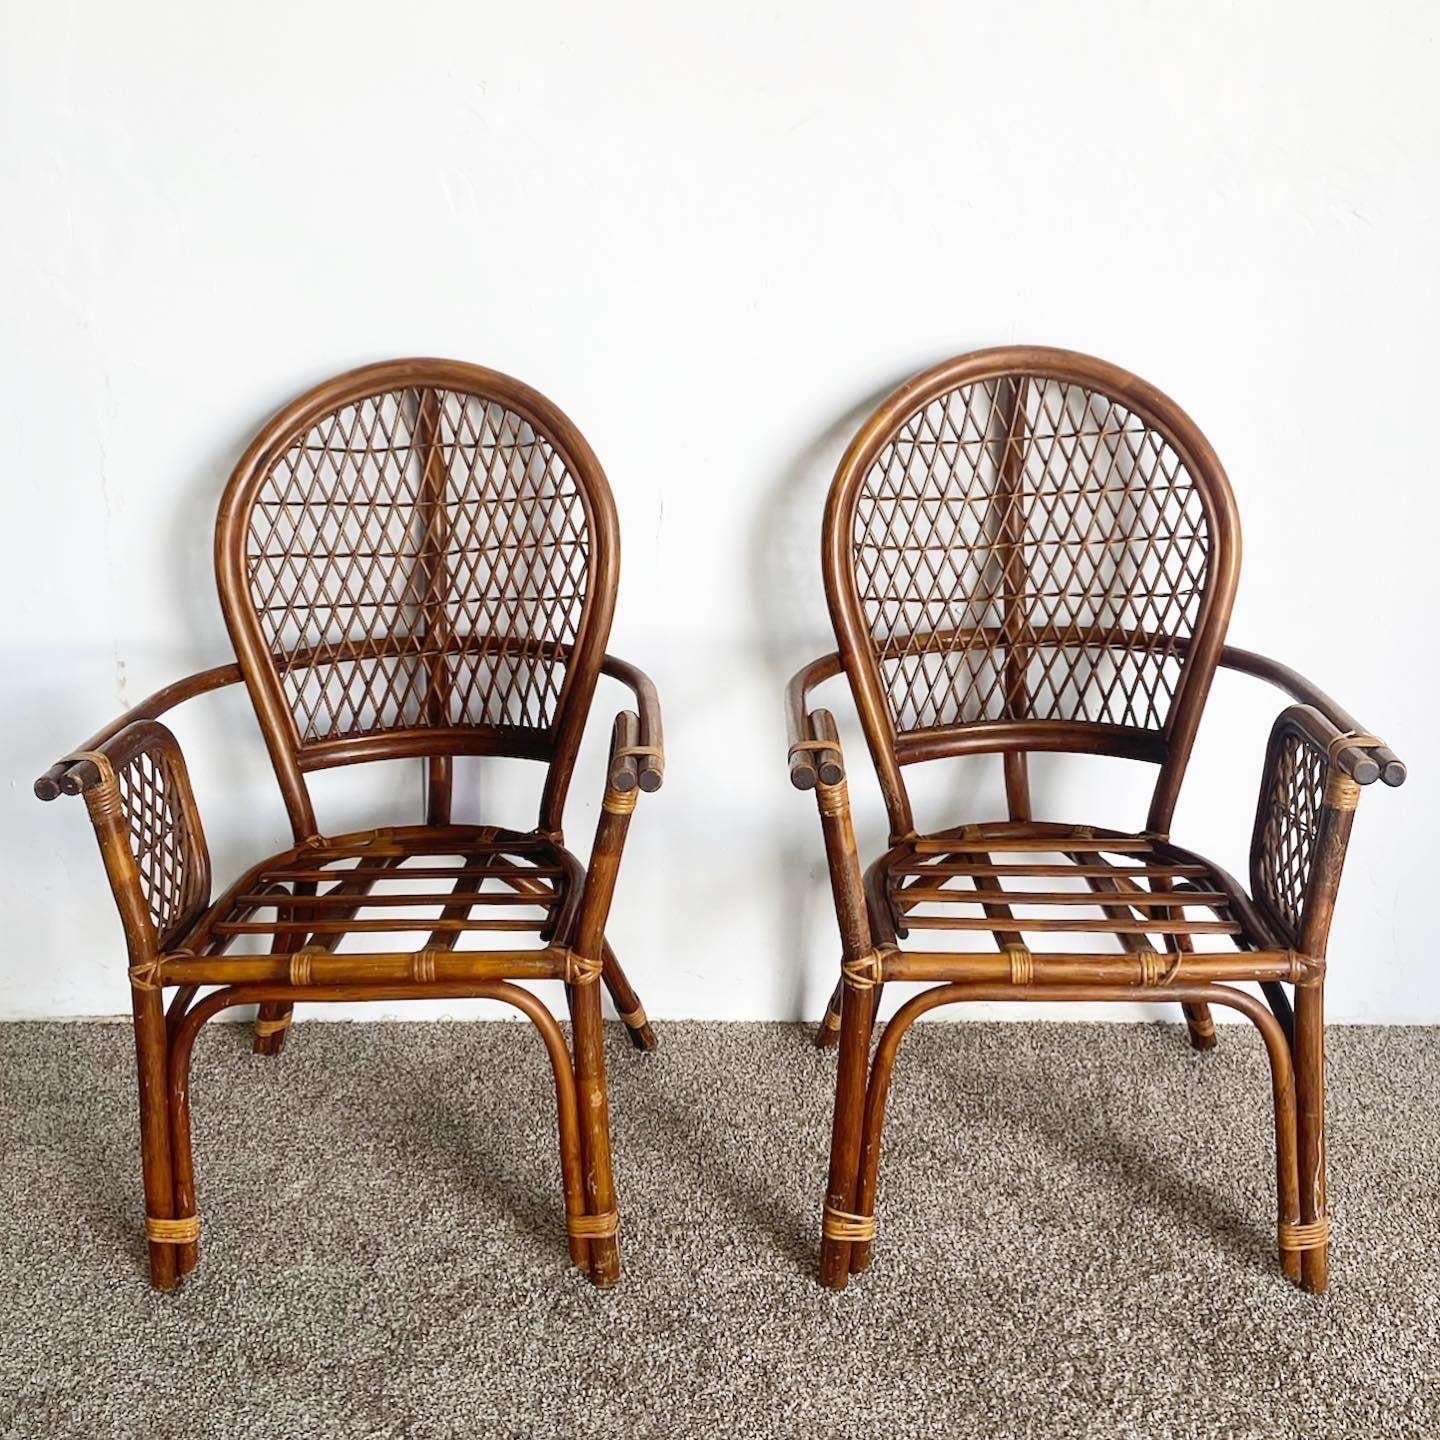 Wonderful set of 4 vintage bohemian bamboo rattan arm chairs. Each feature a balloon back with latticed sides and back rests. 